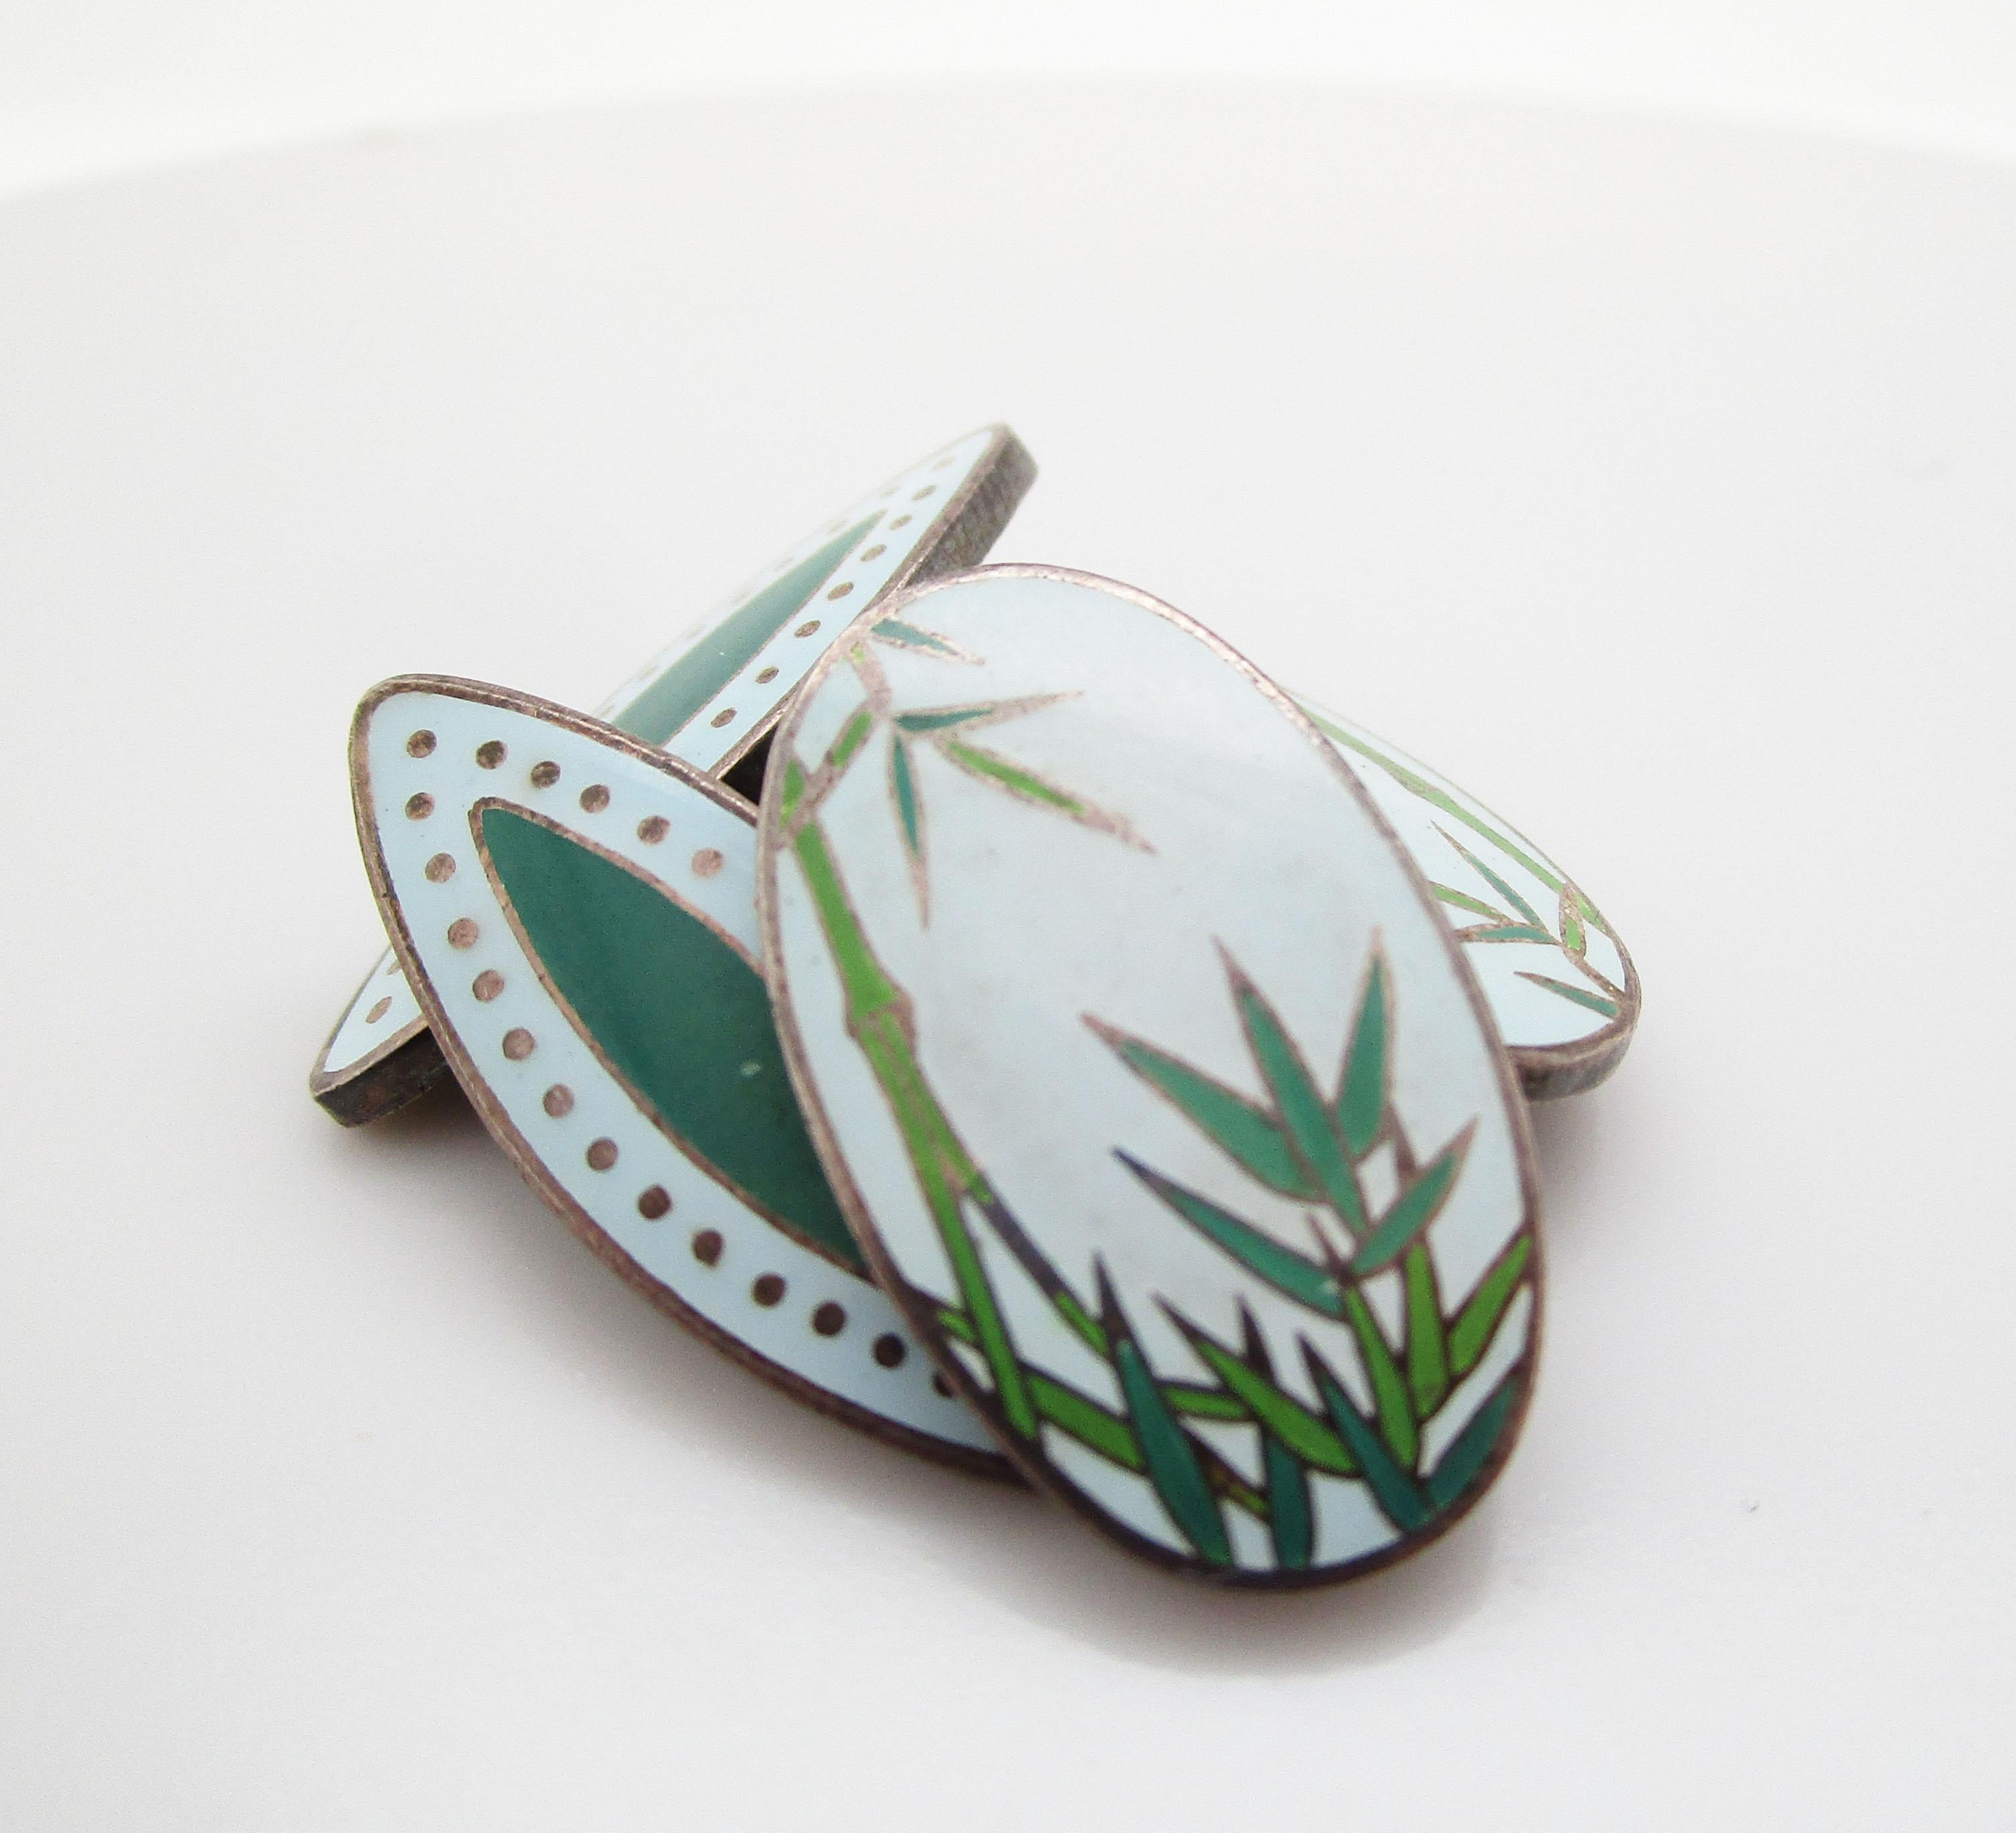 This is an excellent pair of vintage Japanese sterling silver enamel cufflinks with an elegant bamboo pattern. The enamel is in excellent shape and features several shades of green, as well as a soft minty blue shade as the base of the panels. The